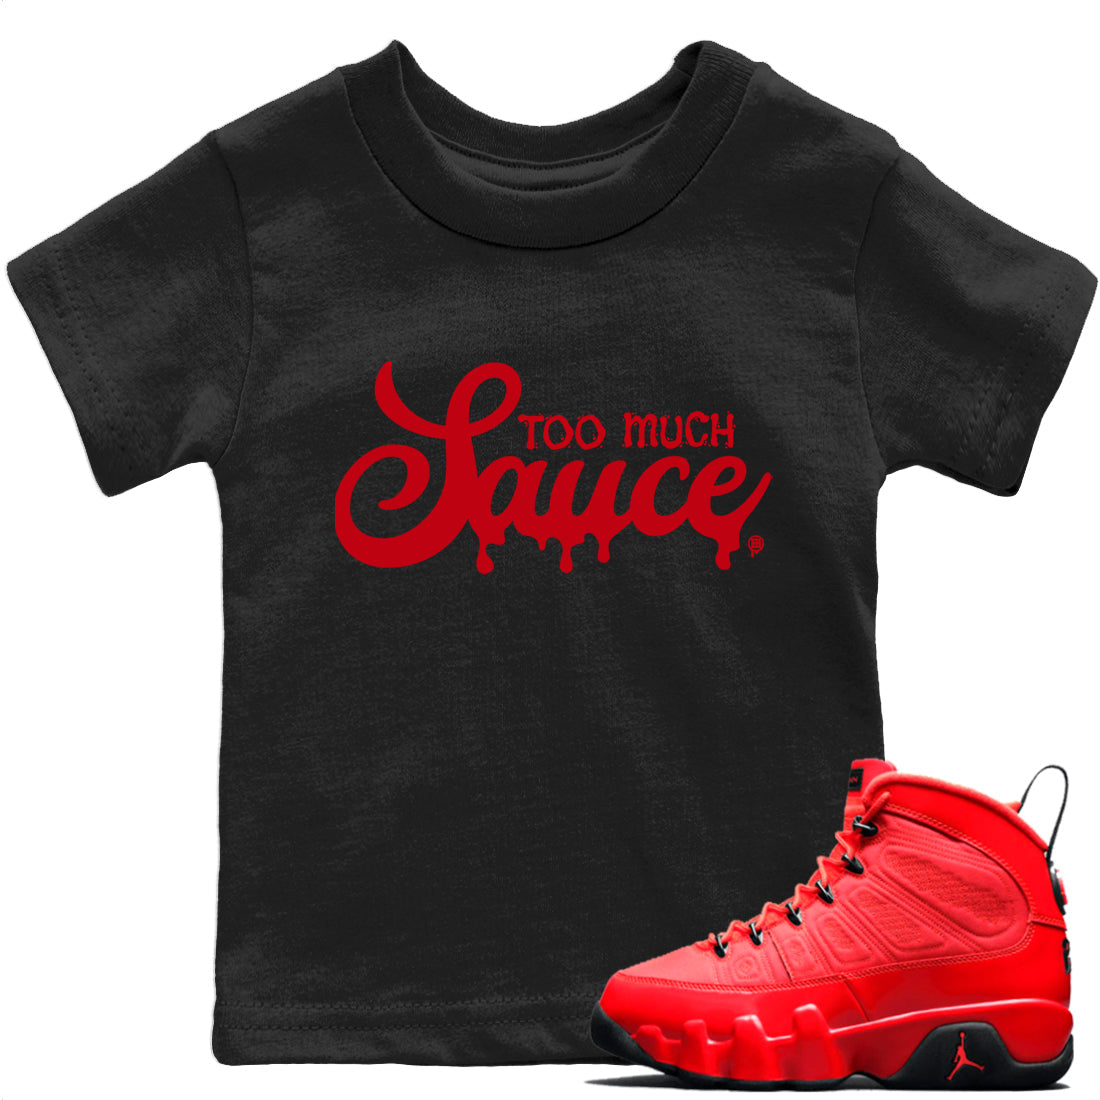 Jordan 9 Chile Red Sneaker Match Tees Too Much Sauce Sneaker Tees Jordan 9 Chile Red Sneaker Release Tees Kids Shirts